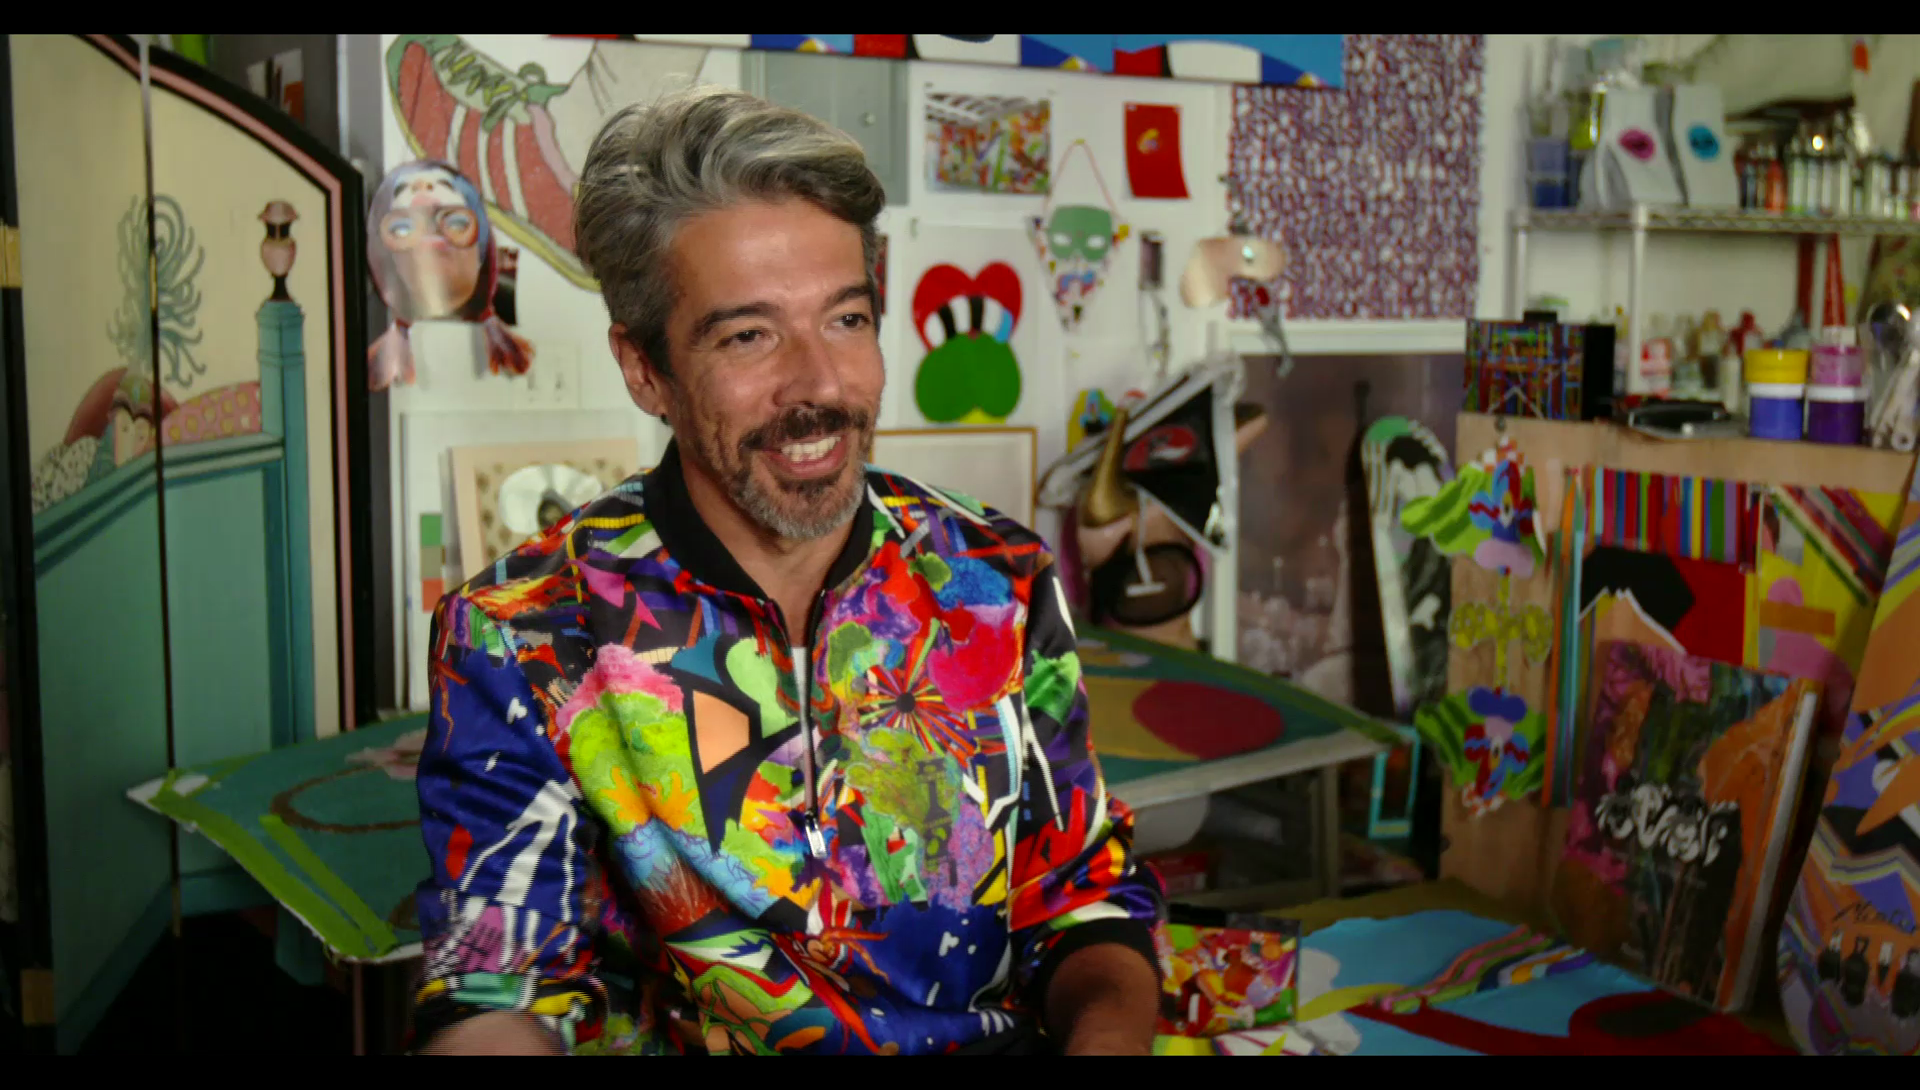 A man sitting in an art studio surrounded by paintings, wearing a colourful t-shirt.